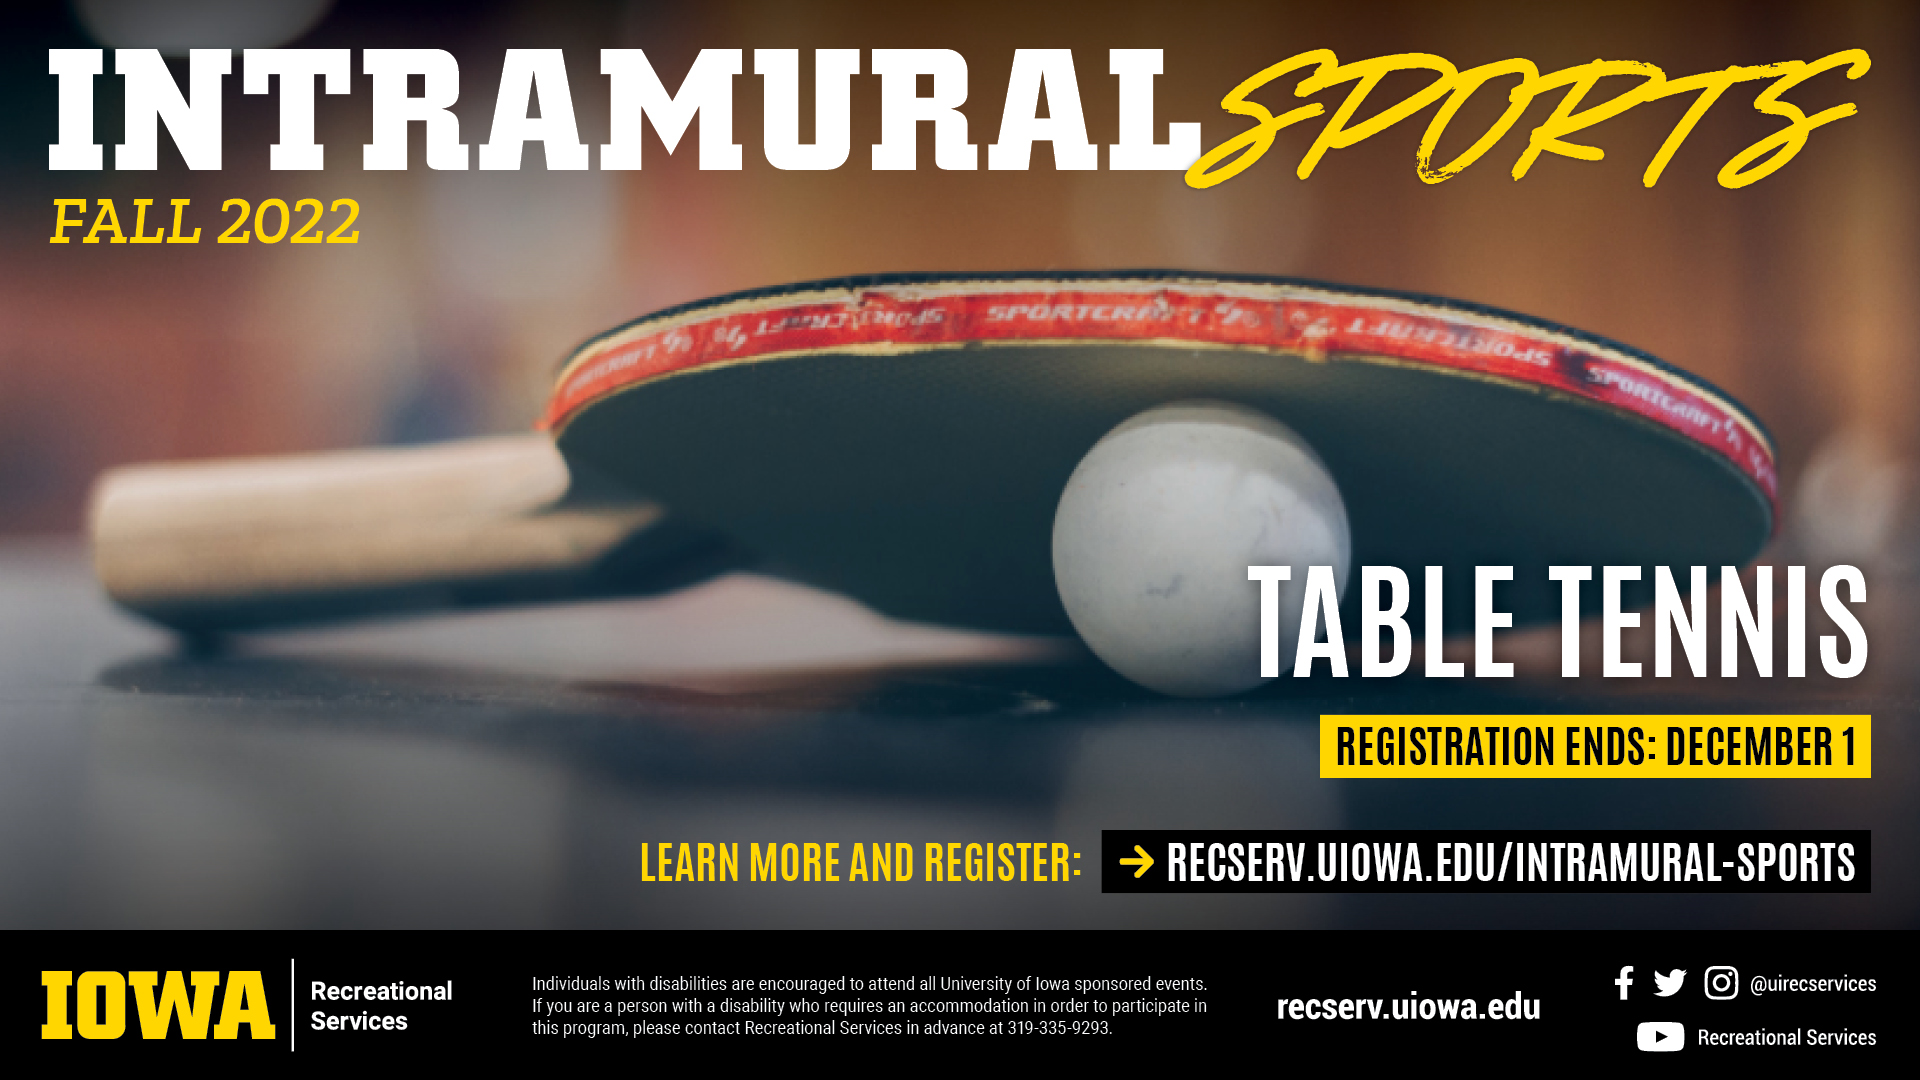 Intramural Sports Fall 2022: Table Tennis. Learn more and register at reserv.uiowa.edu/intramural-sports